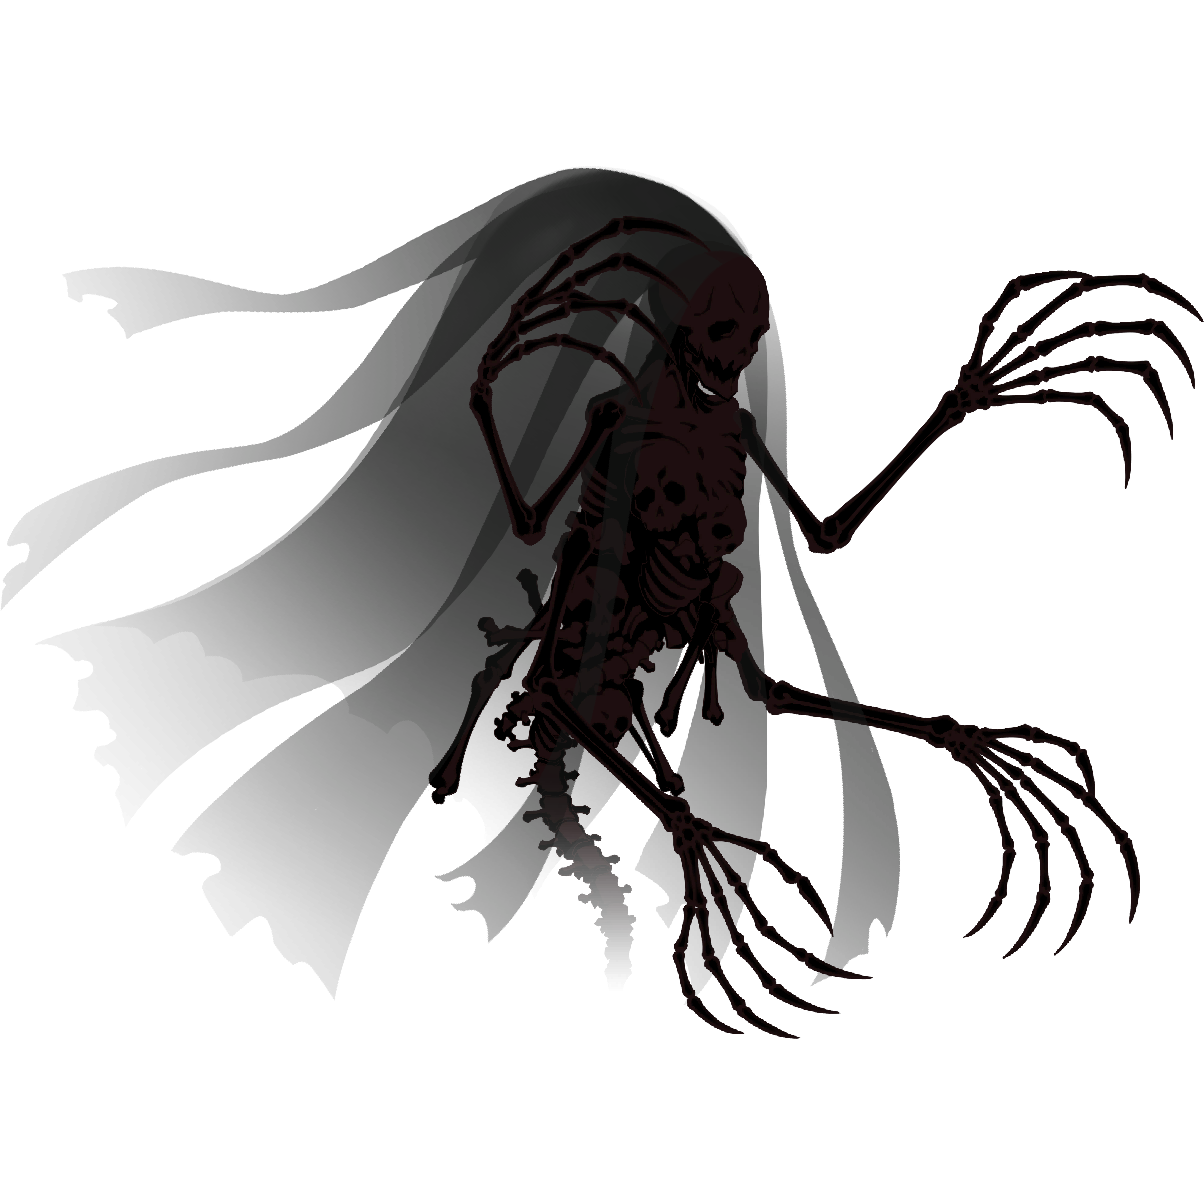 X 上的Siren Song：「Been getting back into the SCP fandom as of